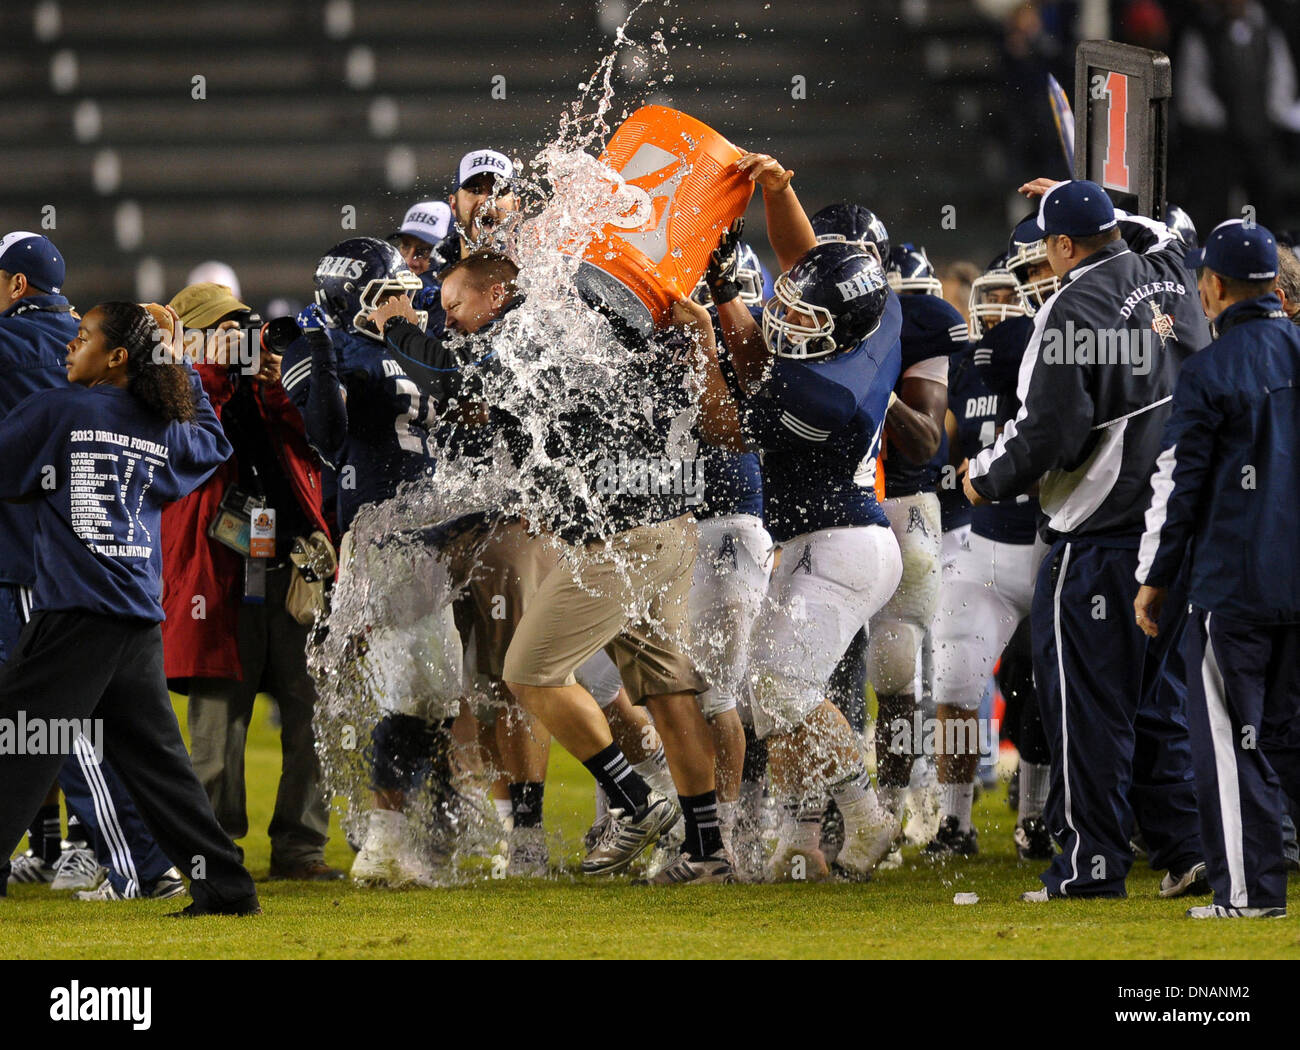 Carson, California, USA. 20th Dec, 2013. December 20, 2013 Carson, CA. Bakersfield Drillers offensive linesman Joshua Nunez #60 dumps a gatorade jug of water on Bakersfield Drillers head coach Paul Golla after defeating the Del Oro Golden Eagles in the CIF State Division 4 Championship Bowl game between the Del Oro Golden Eagles and the Bakersfield Drillers at the Stub Hub Center in Carson, CA. David Hood/CSM. Credit:  csm/Alamy Live News Stock Photo